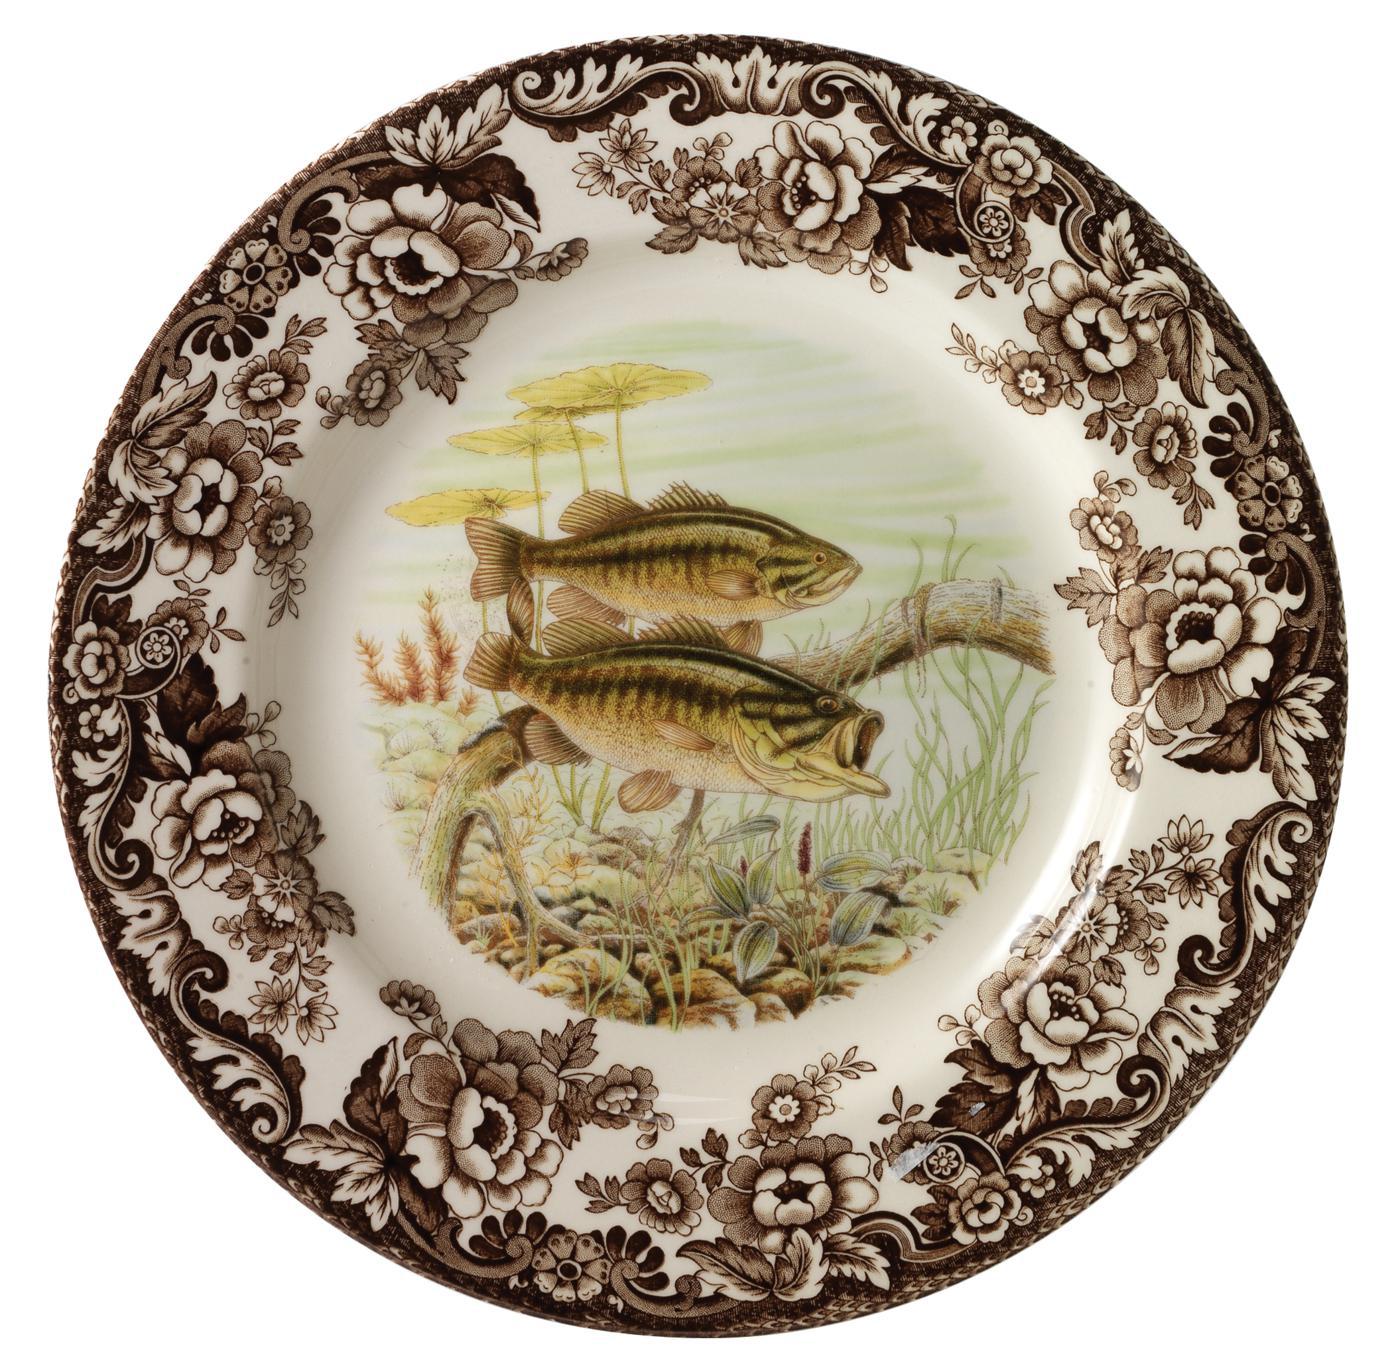 Spode Woodland Salad Plate Large mouth Bass